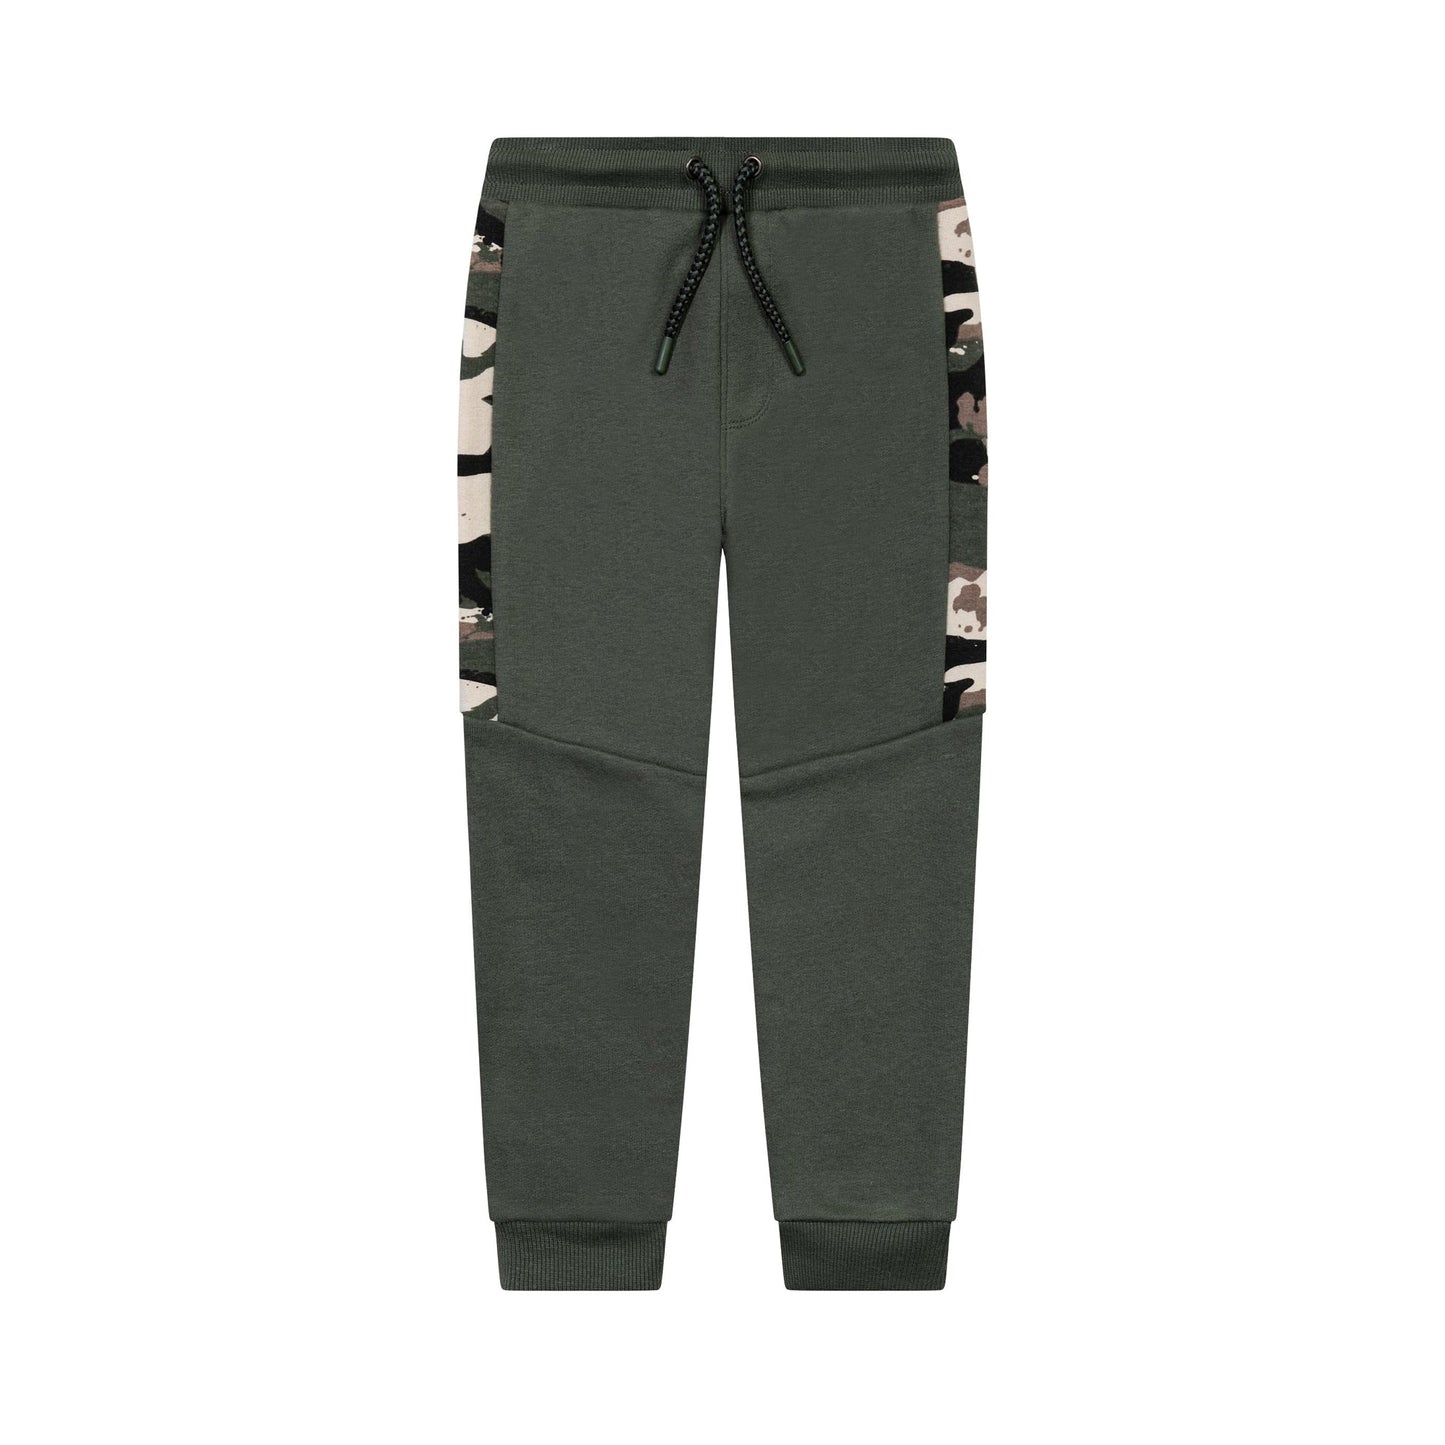 Boys Camouflage Printed Tracksuit